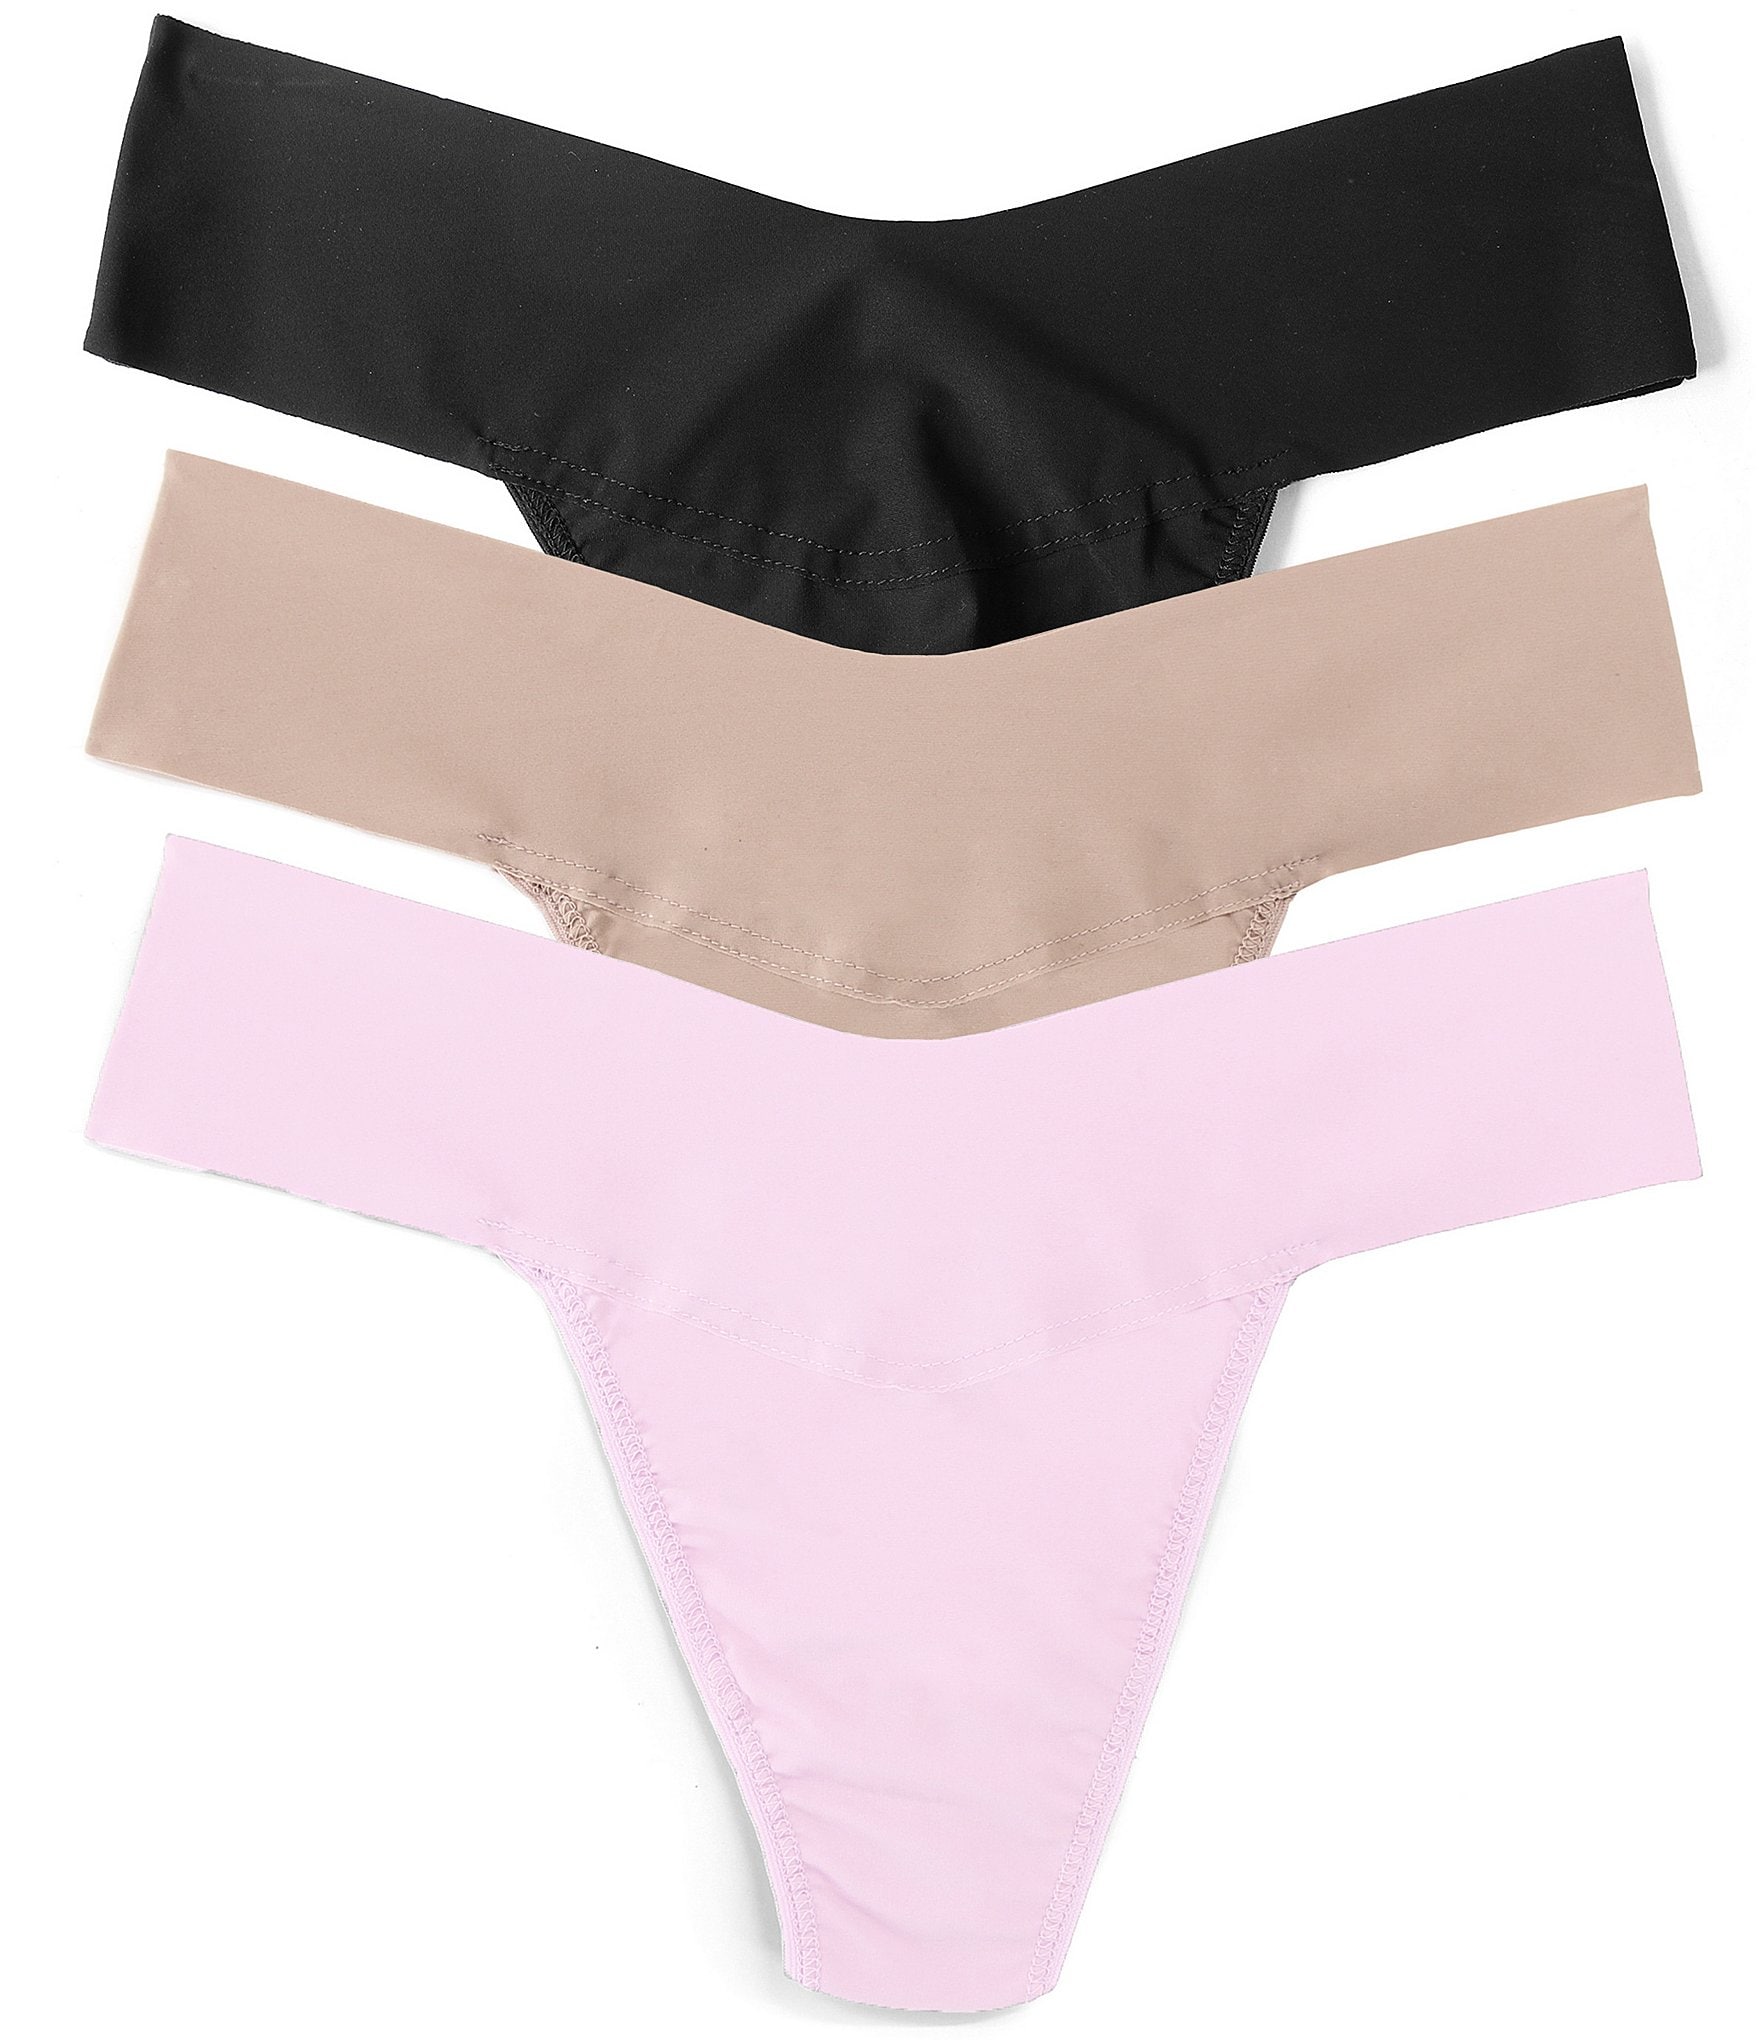 Buy Victoria's Secret Black Smooth Seamless Thong Panty from Next Ireland